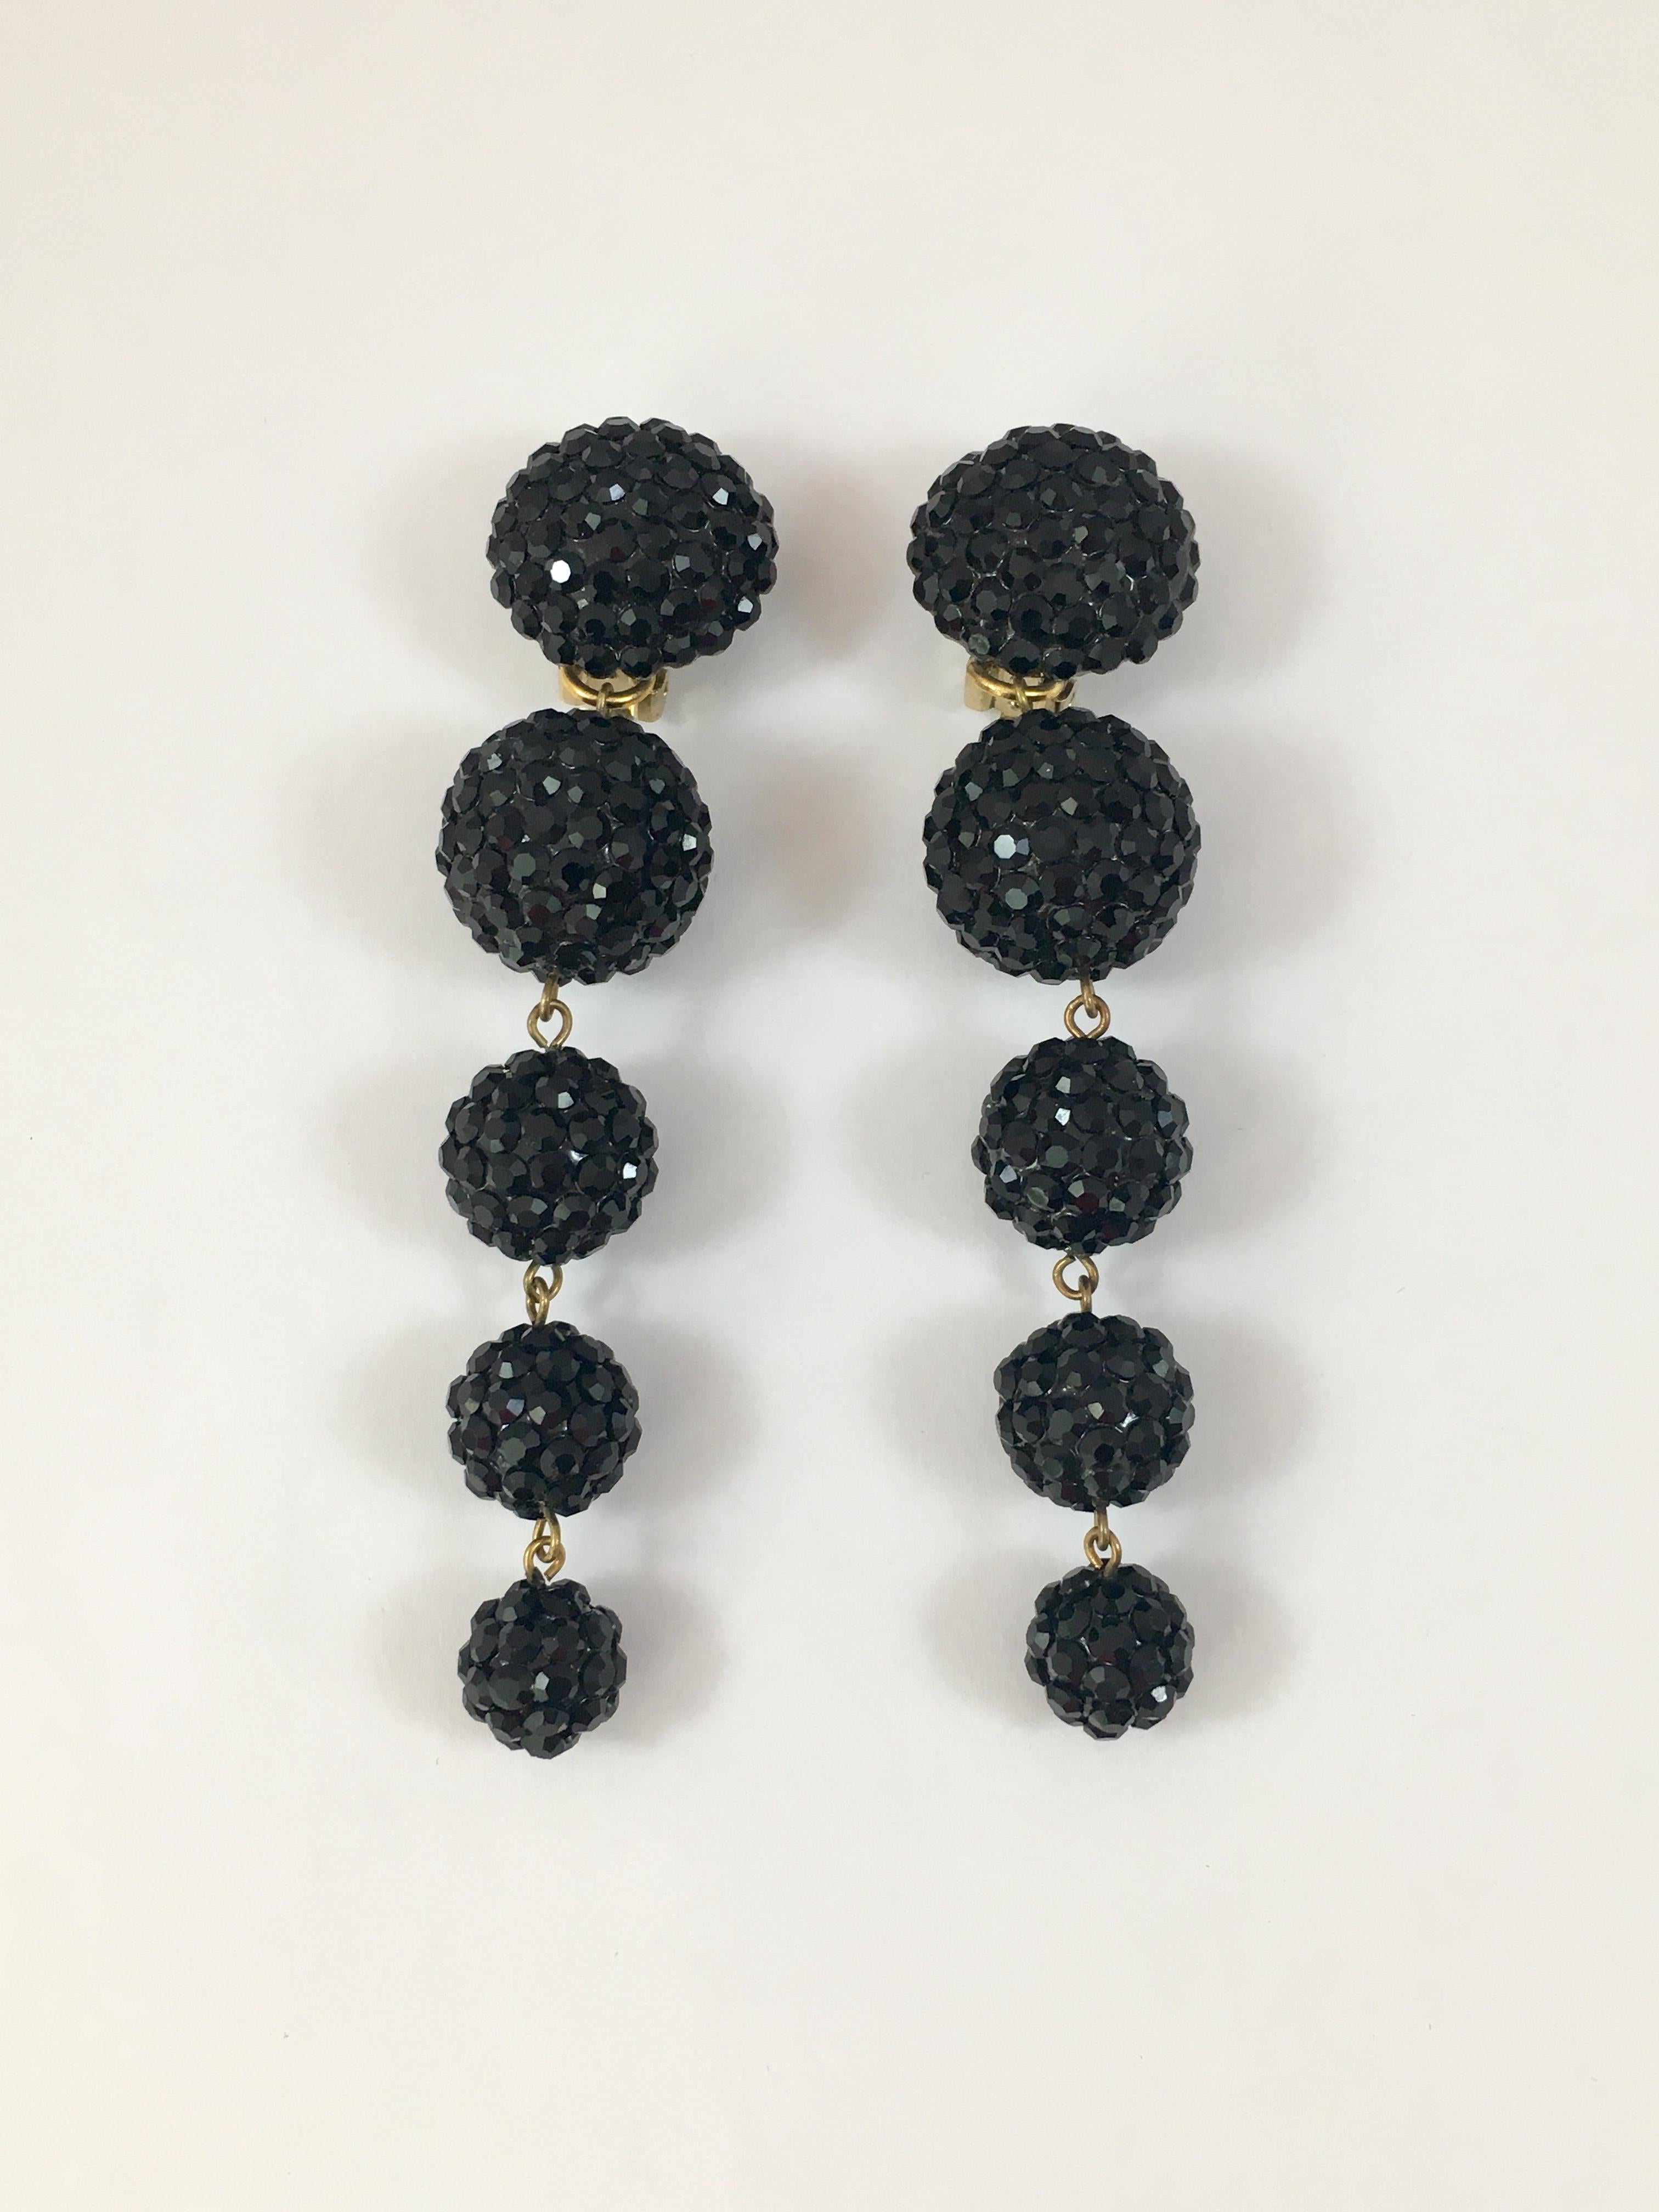 Richard Kerr Black Dangle Statement Earrings, 1980s  In Excellent Condition For Sale In Chicago, IL